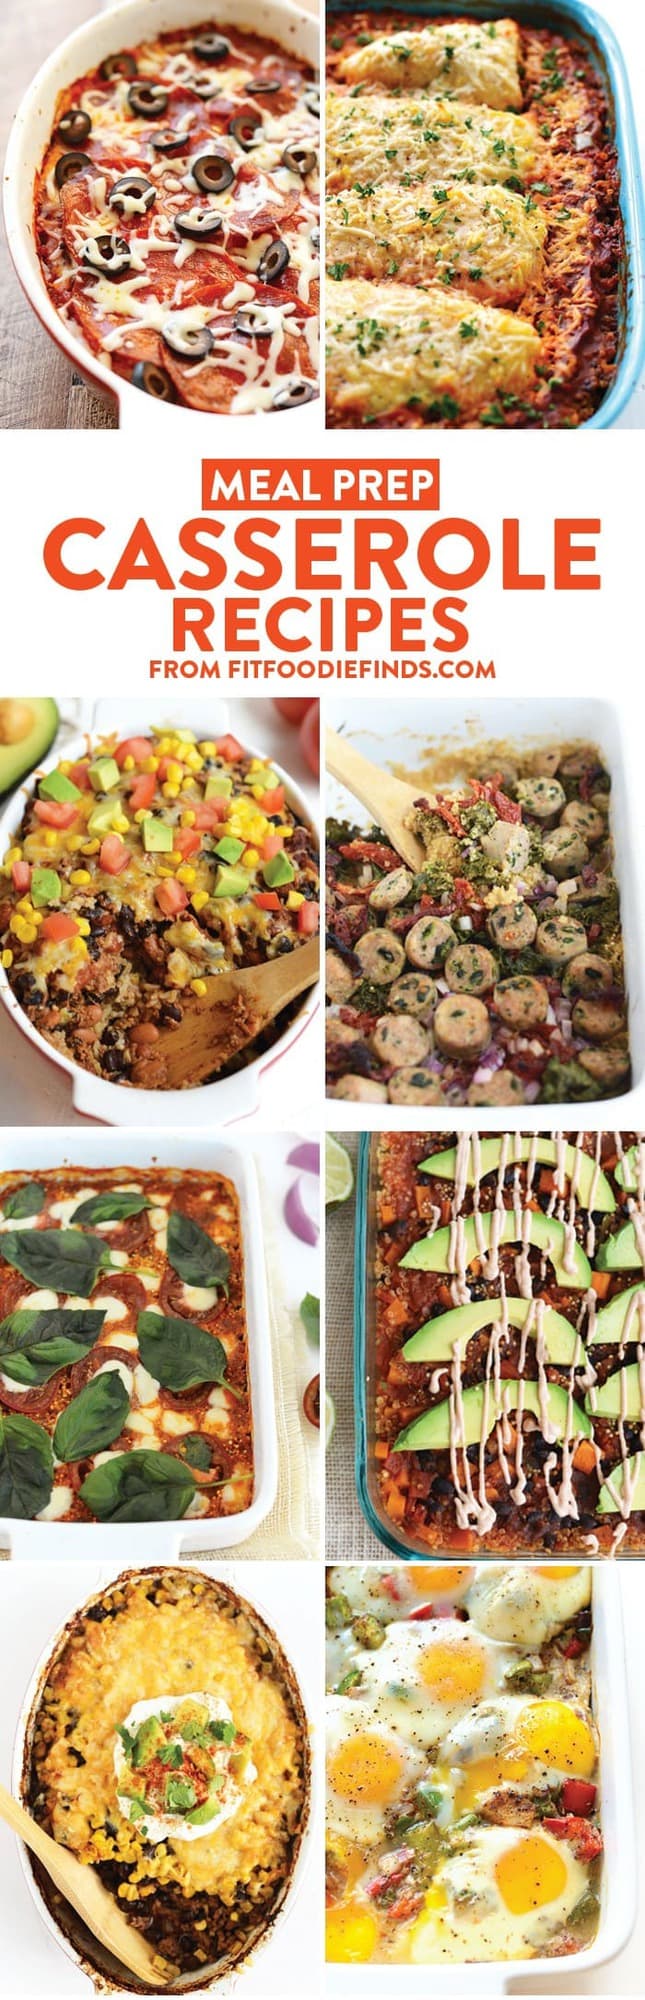 Check out some of Fit Foodie Finds' best meal prep casserole recipes! They're all made in under 60 minutes and packed with whole grains, veggies, and lean protein! 